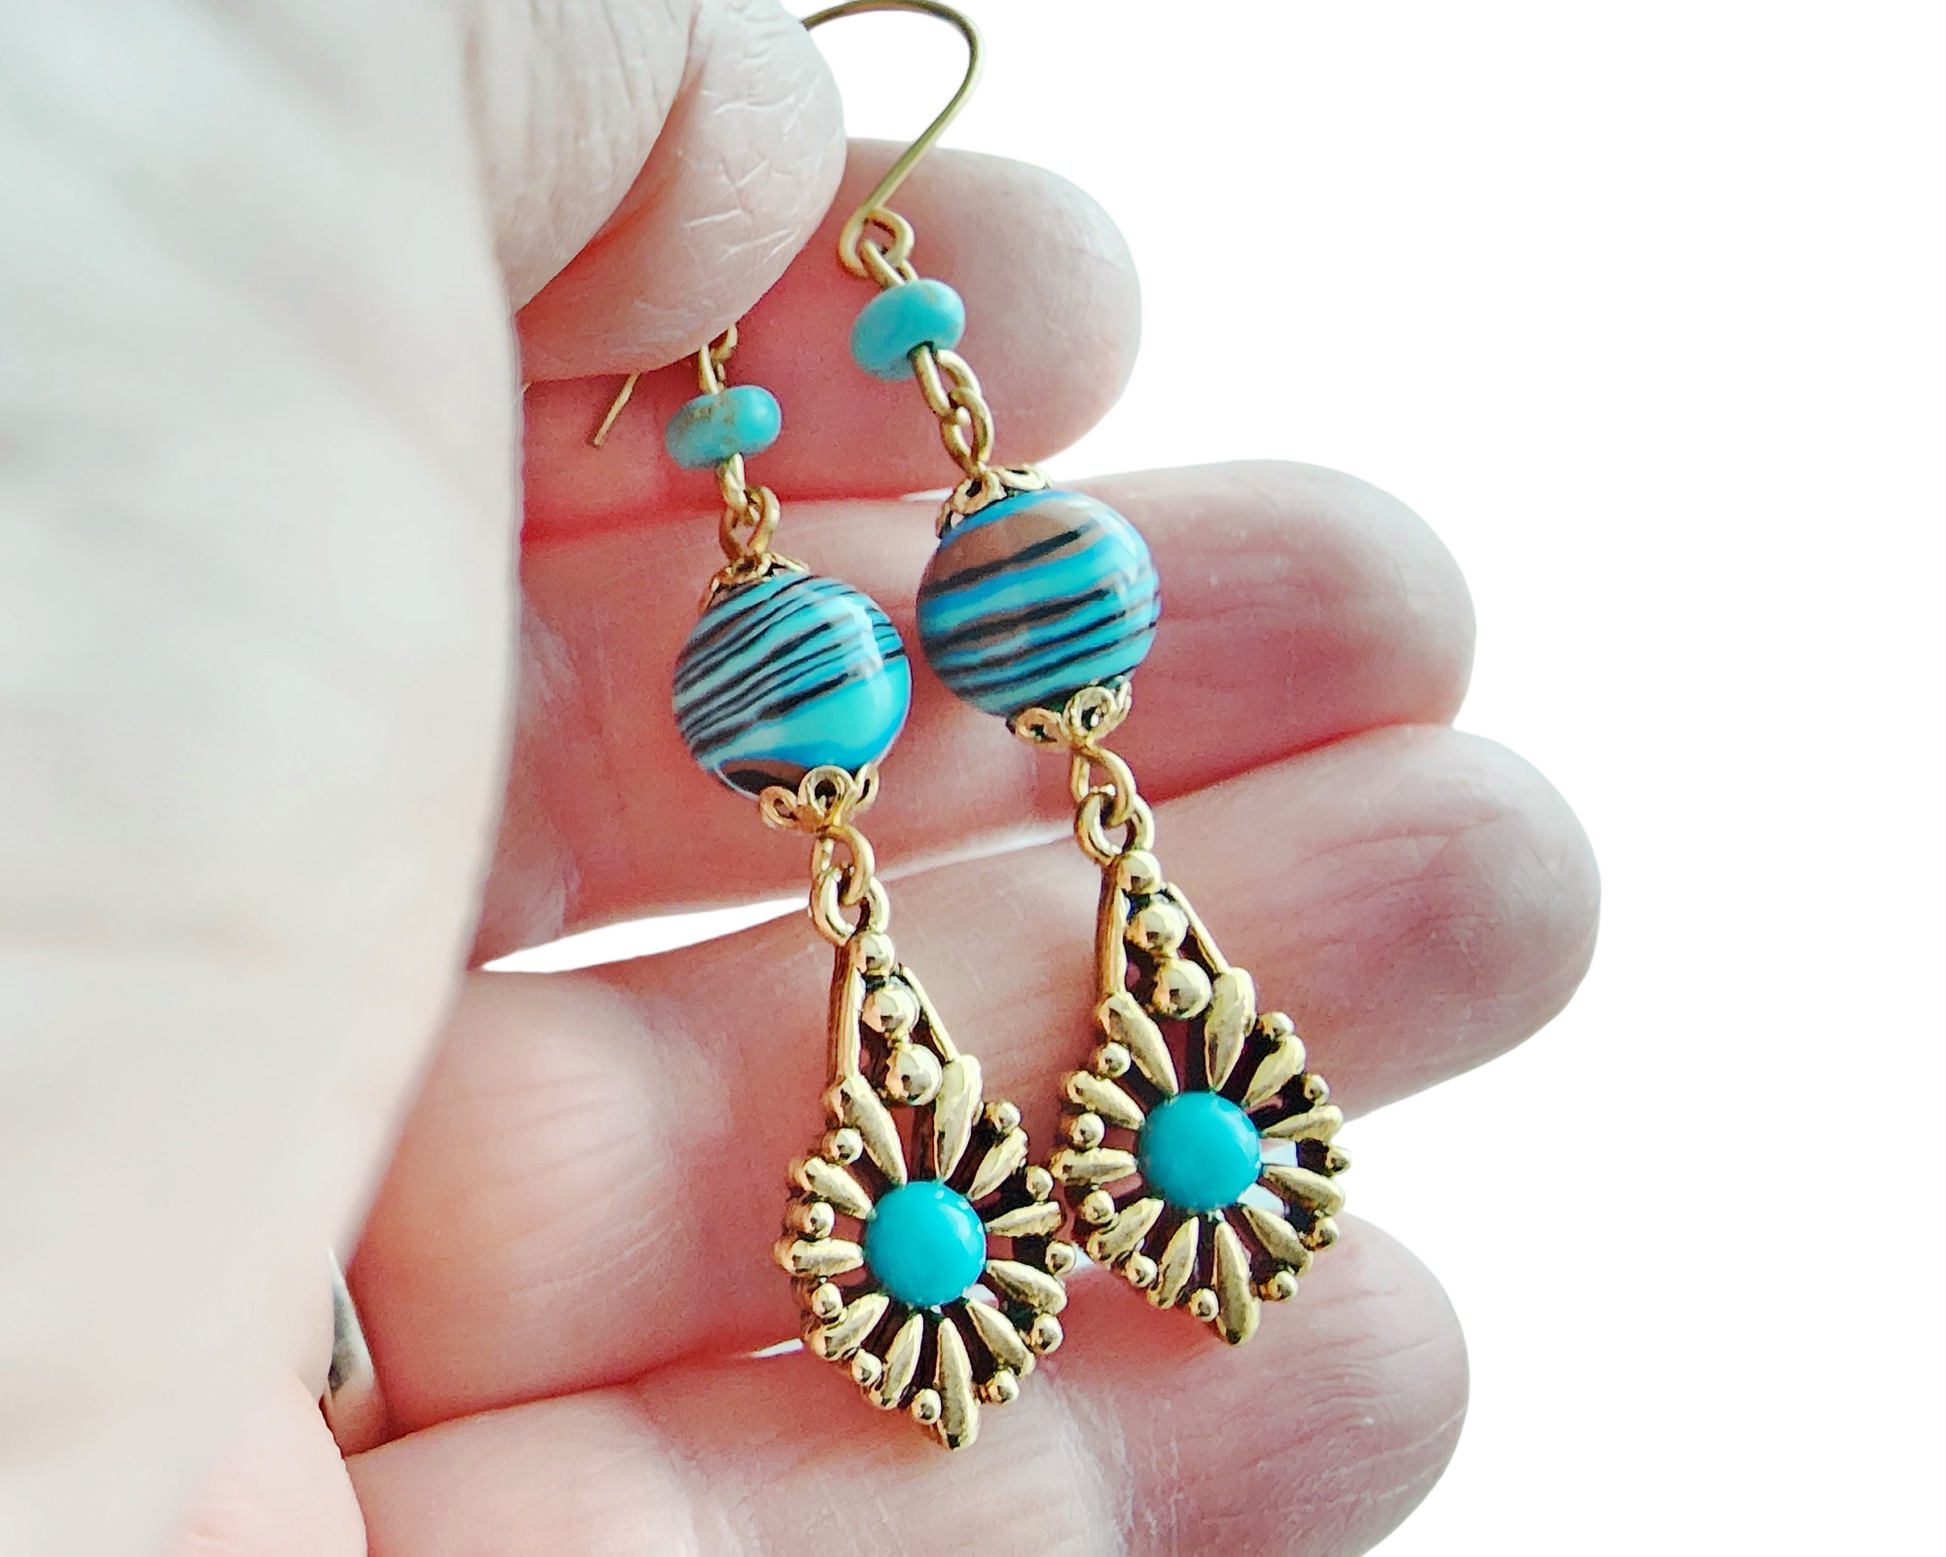 Long Eco Turquoise Golden Earrings, turquoise malachite, gold plated, turquoise and French earrings wires on white background.